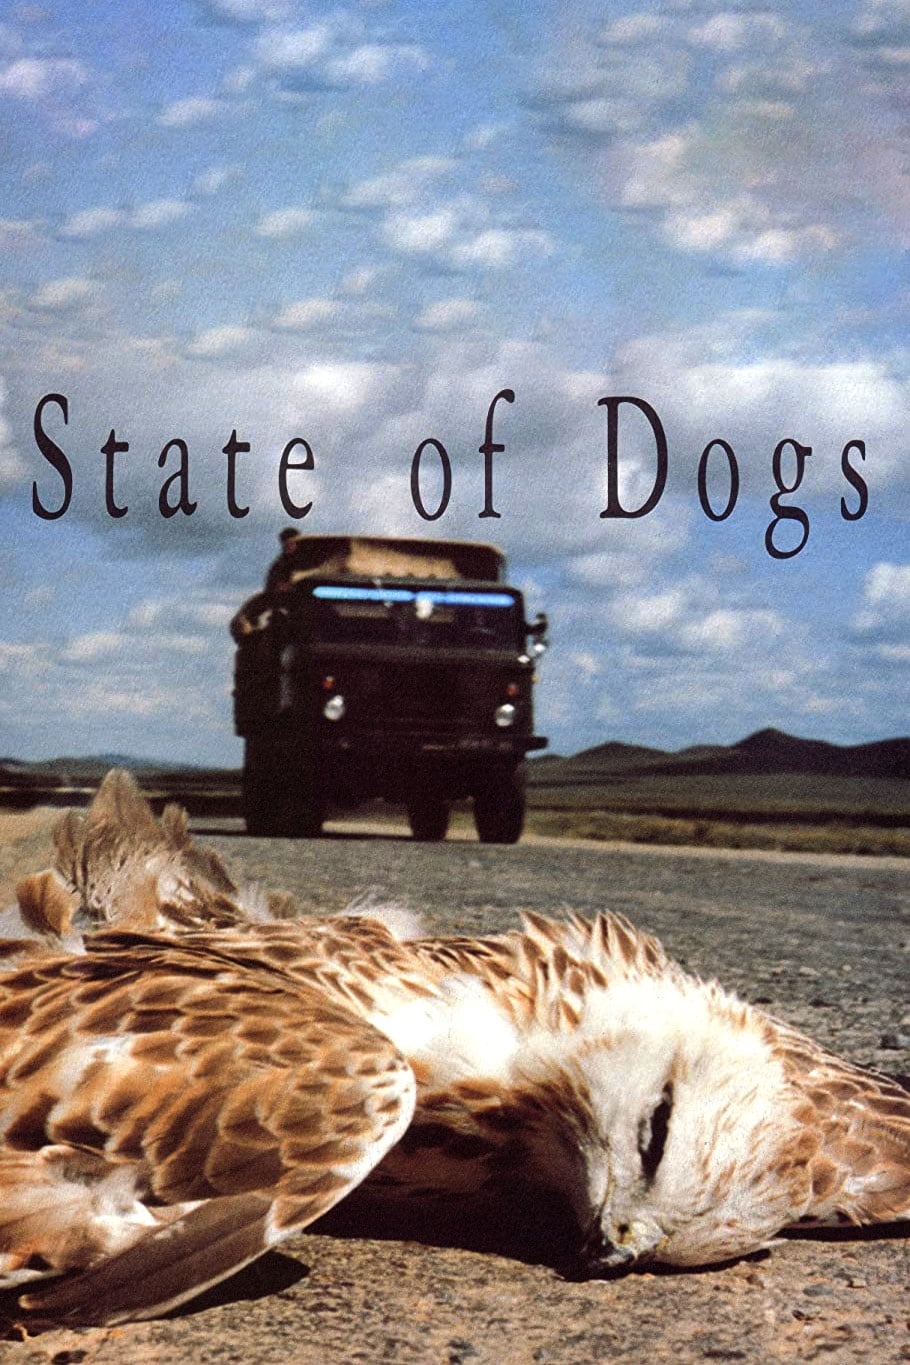 State of Dogs (1998)